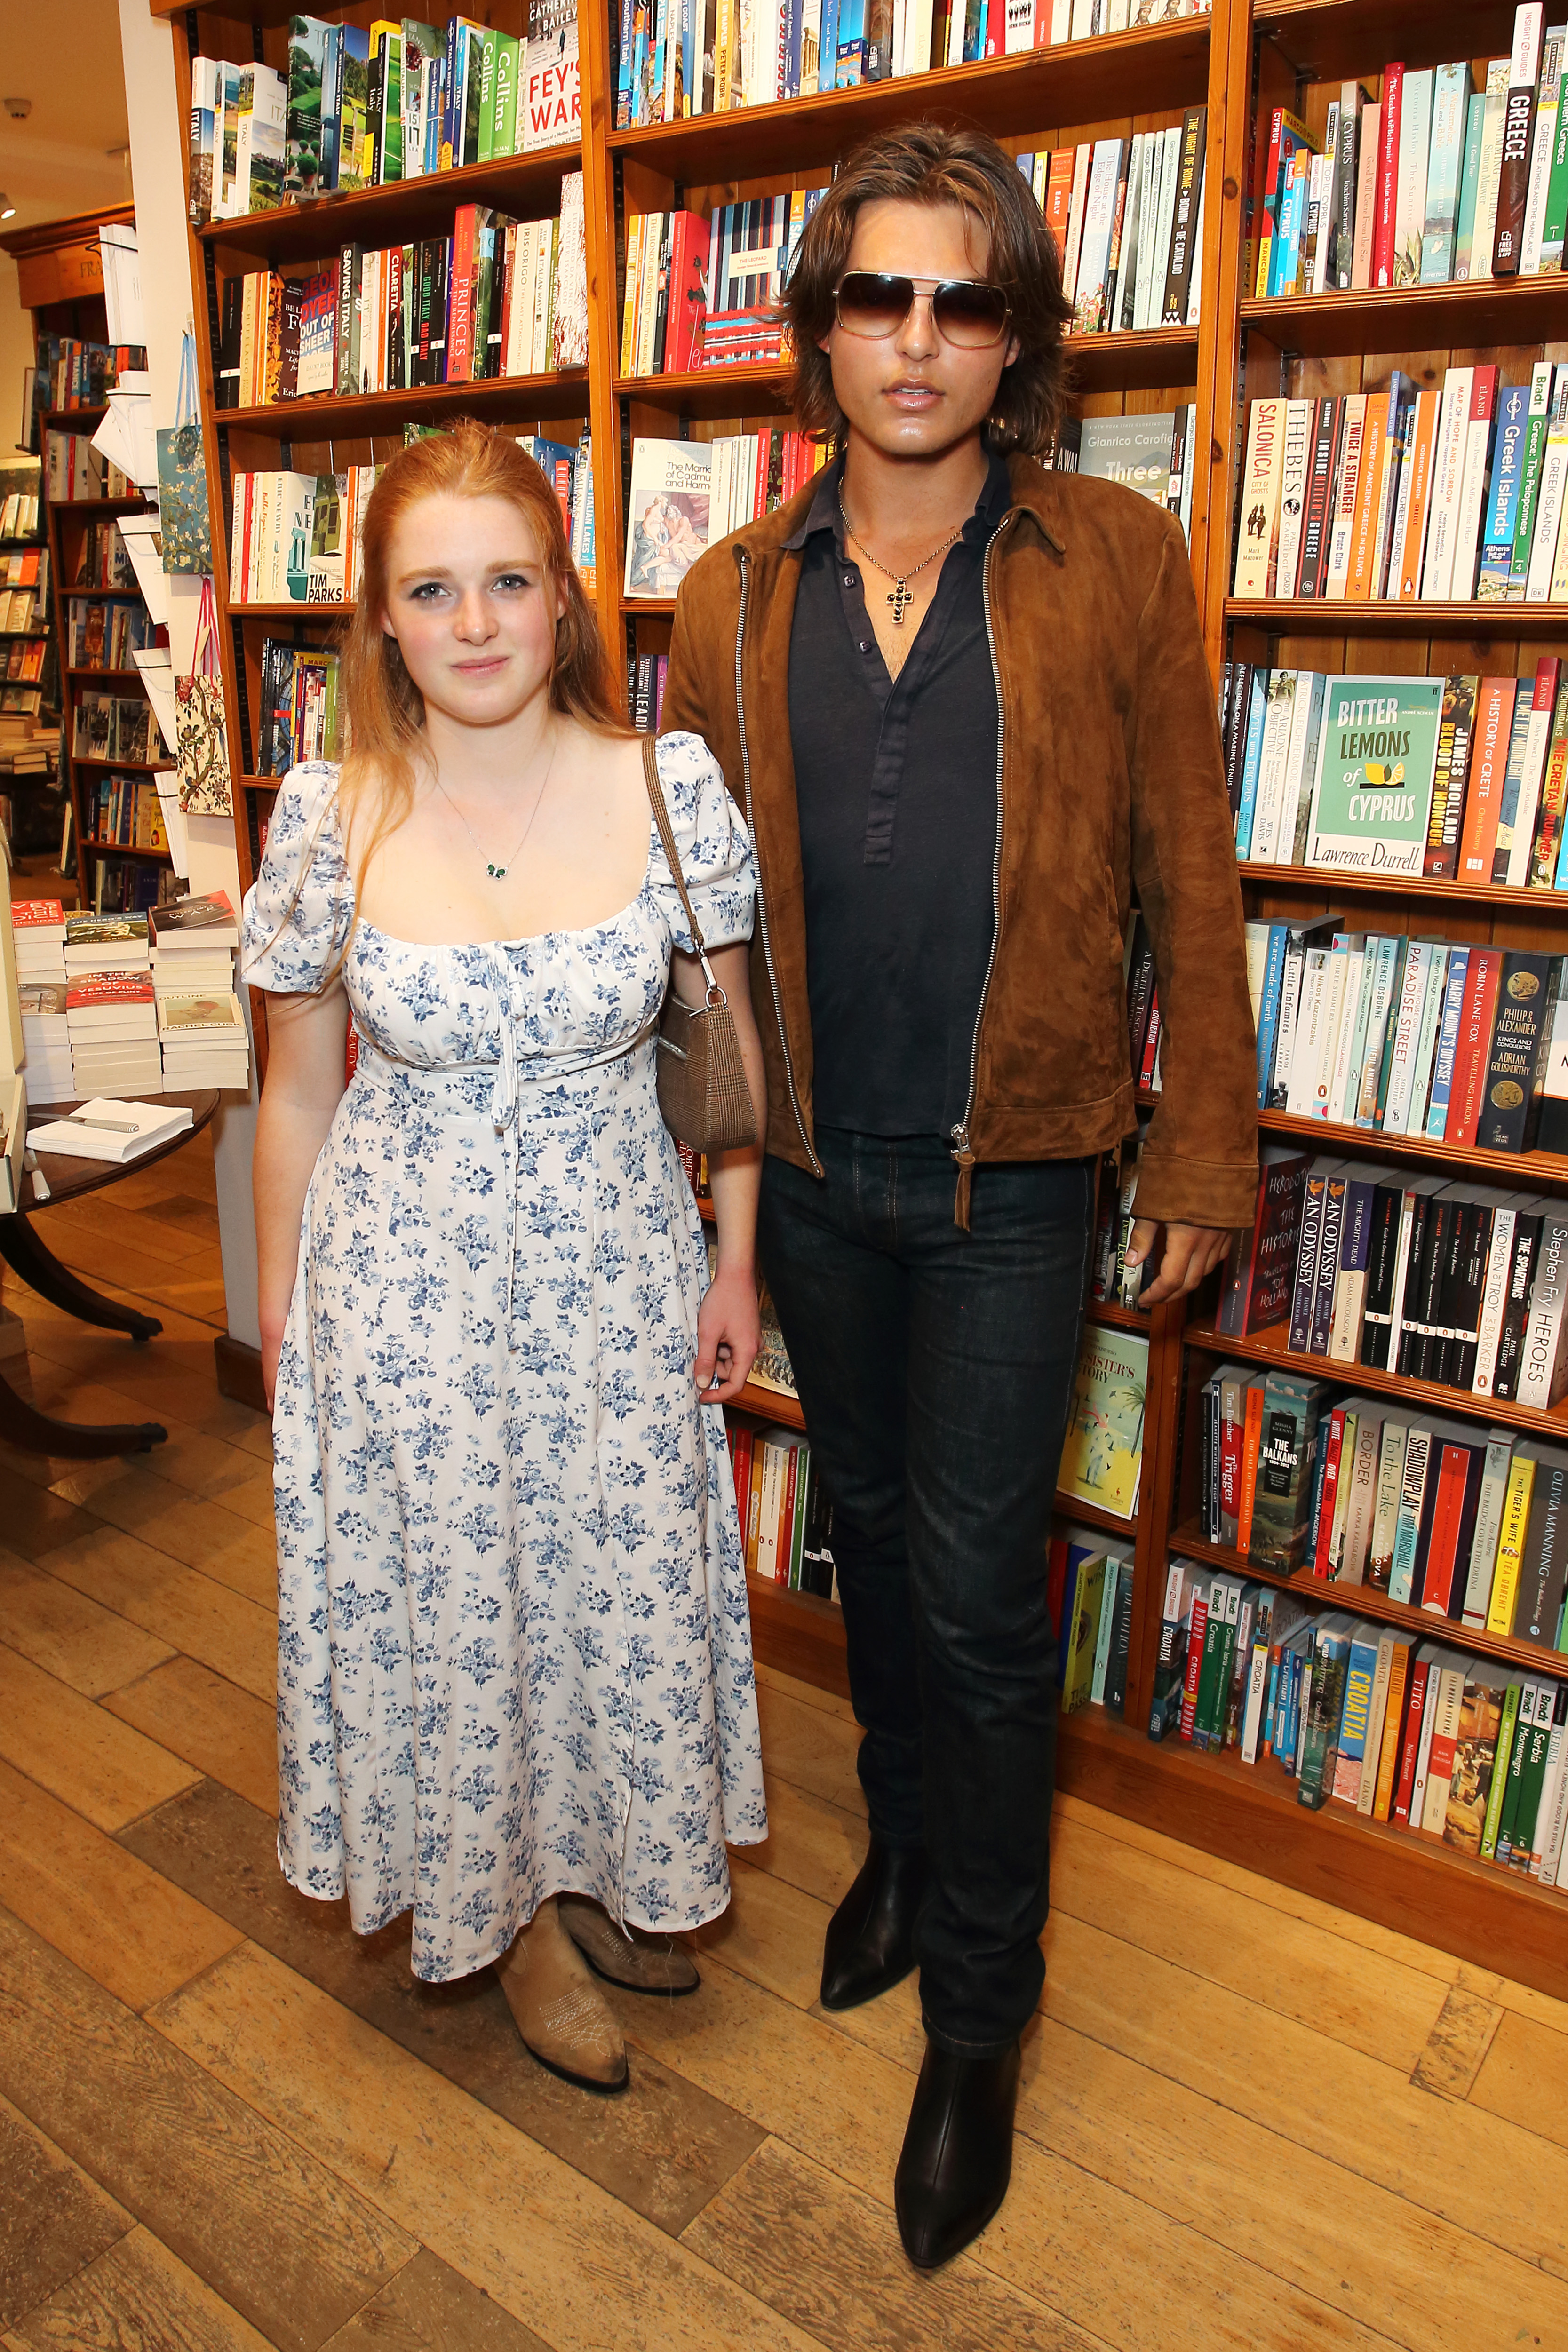 Millie Griffiths and Damian Hurley during the launch of new novel "The Quickening" by Talulah Riley at Daunt Books on June 22, 2022, in London, England. | Source: Getty Images